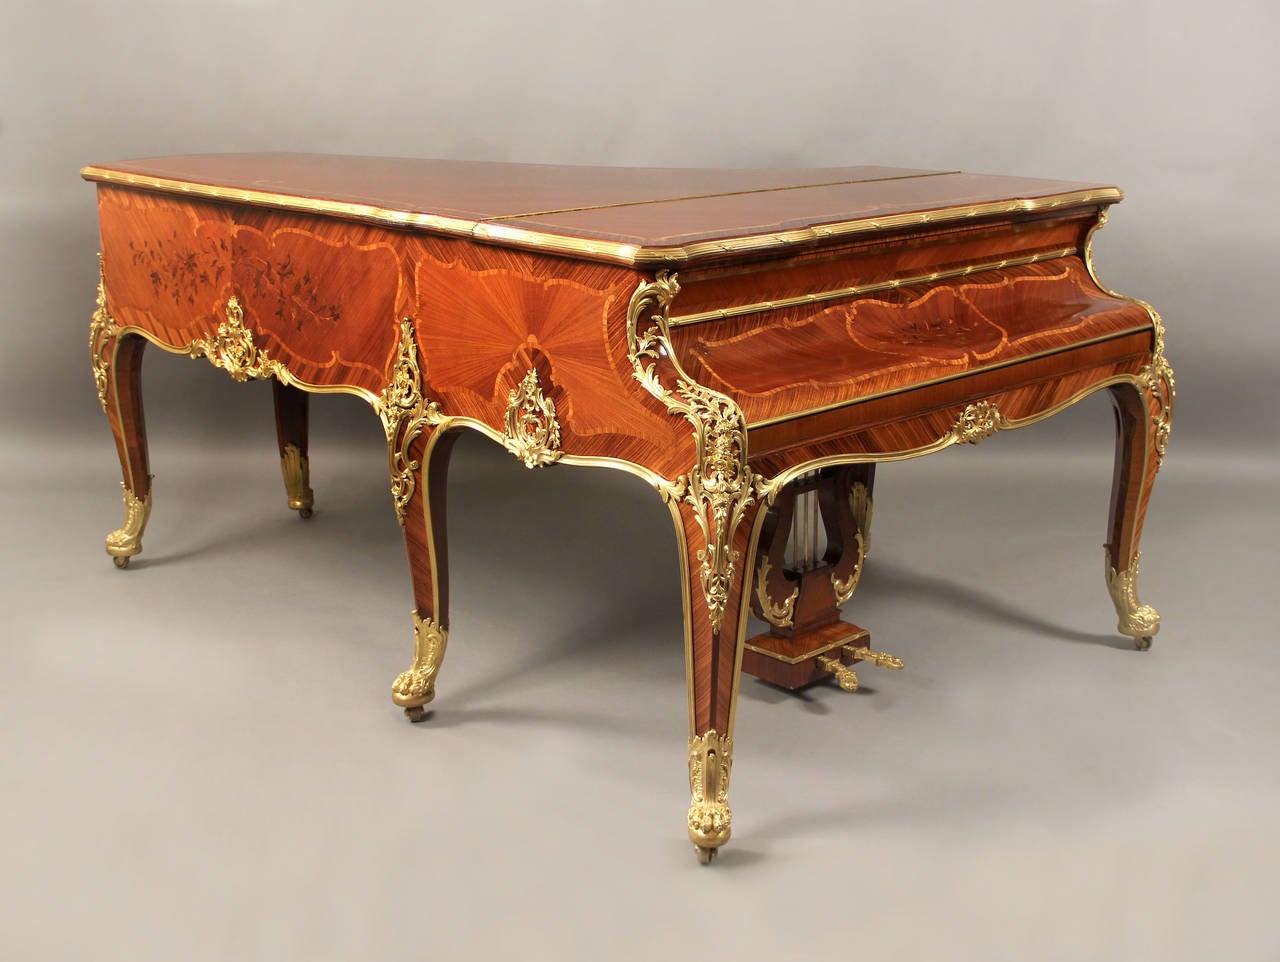 A fantastic quality early 20th century Louis XV style gilt bronze-mounted marquetry six-leg grand Erard piano.

By François Linke.

Beautiful sunburst veneer with inlaid floral marquetry designs. Great quality floral bronze mounts running down